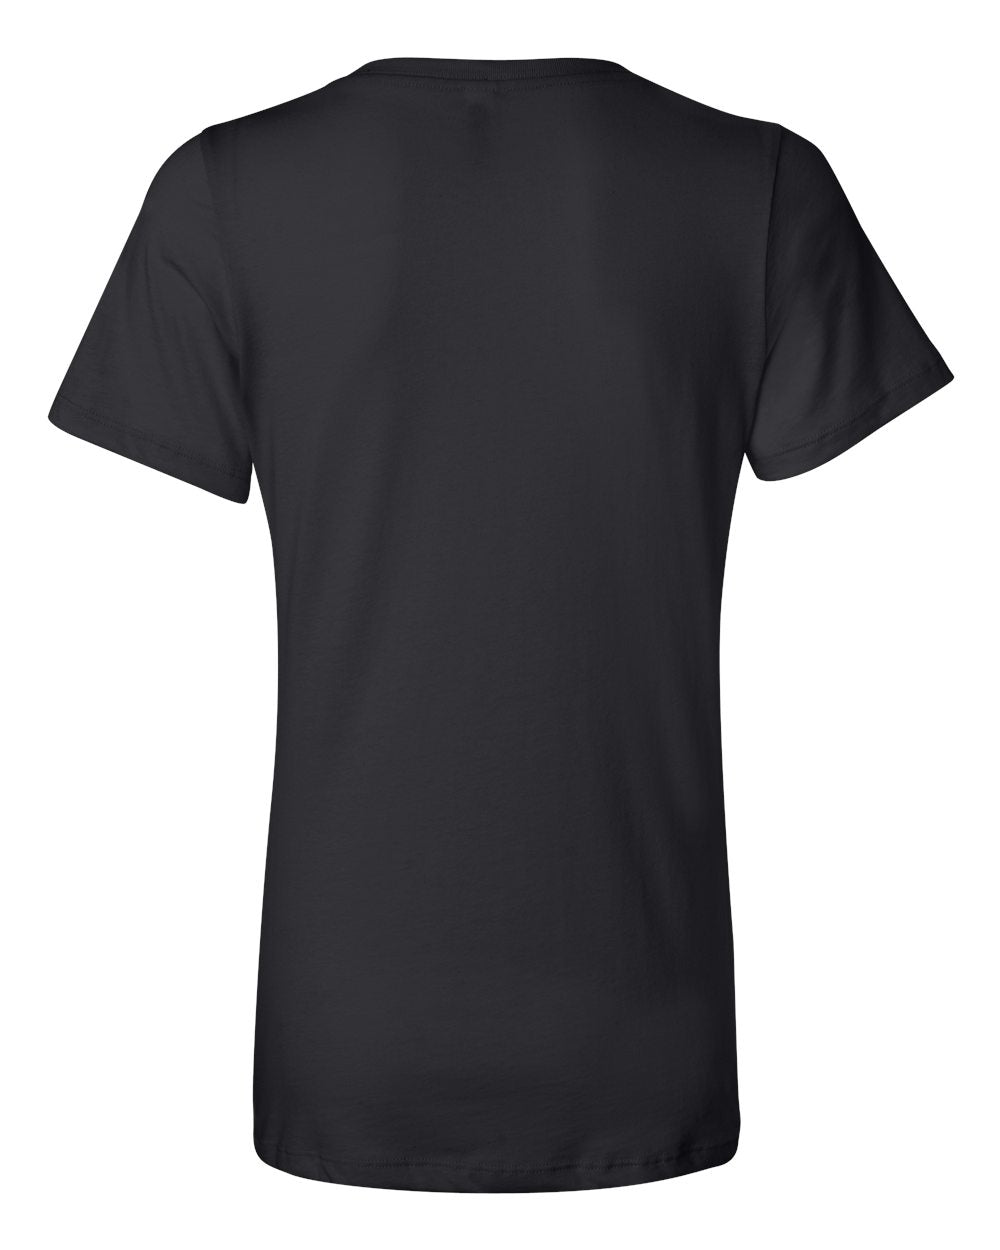 BELLA + CANVAS Women’s Relaxed Jersey V-Neck Tee 6405 #color_Black